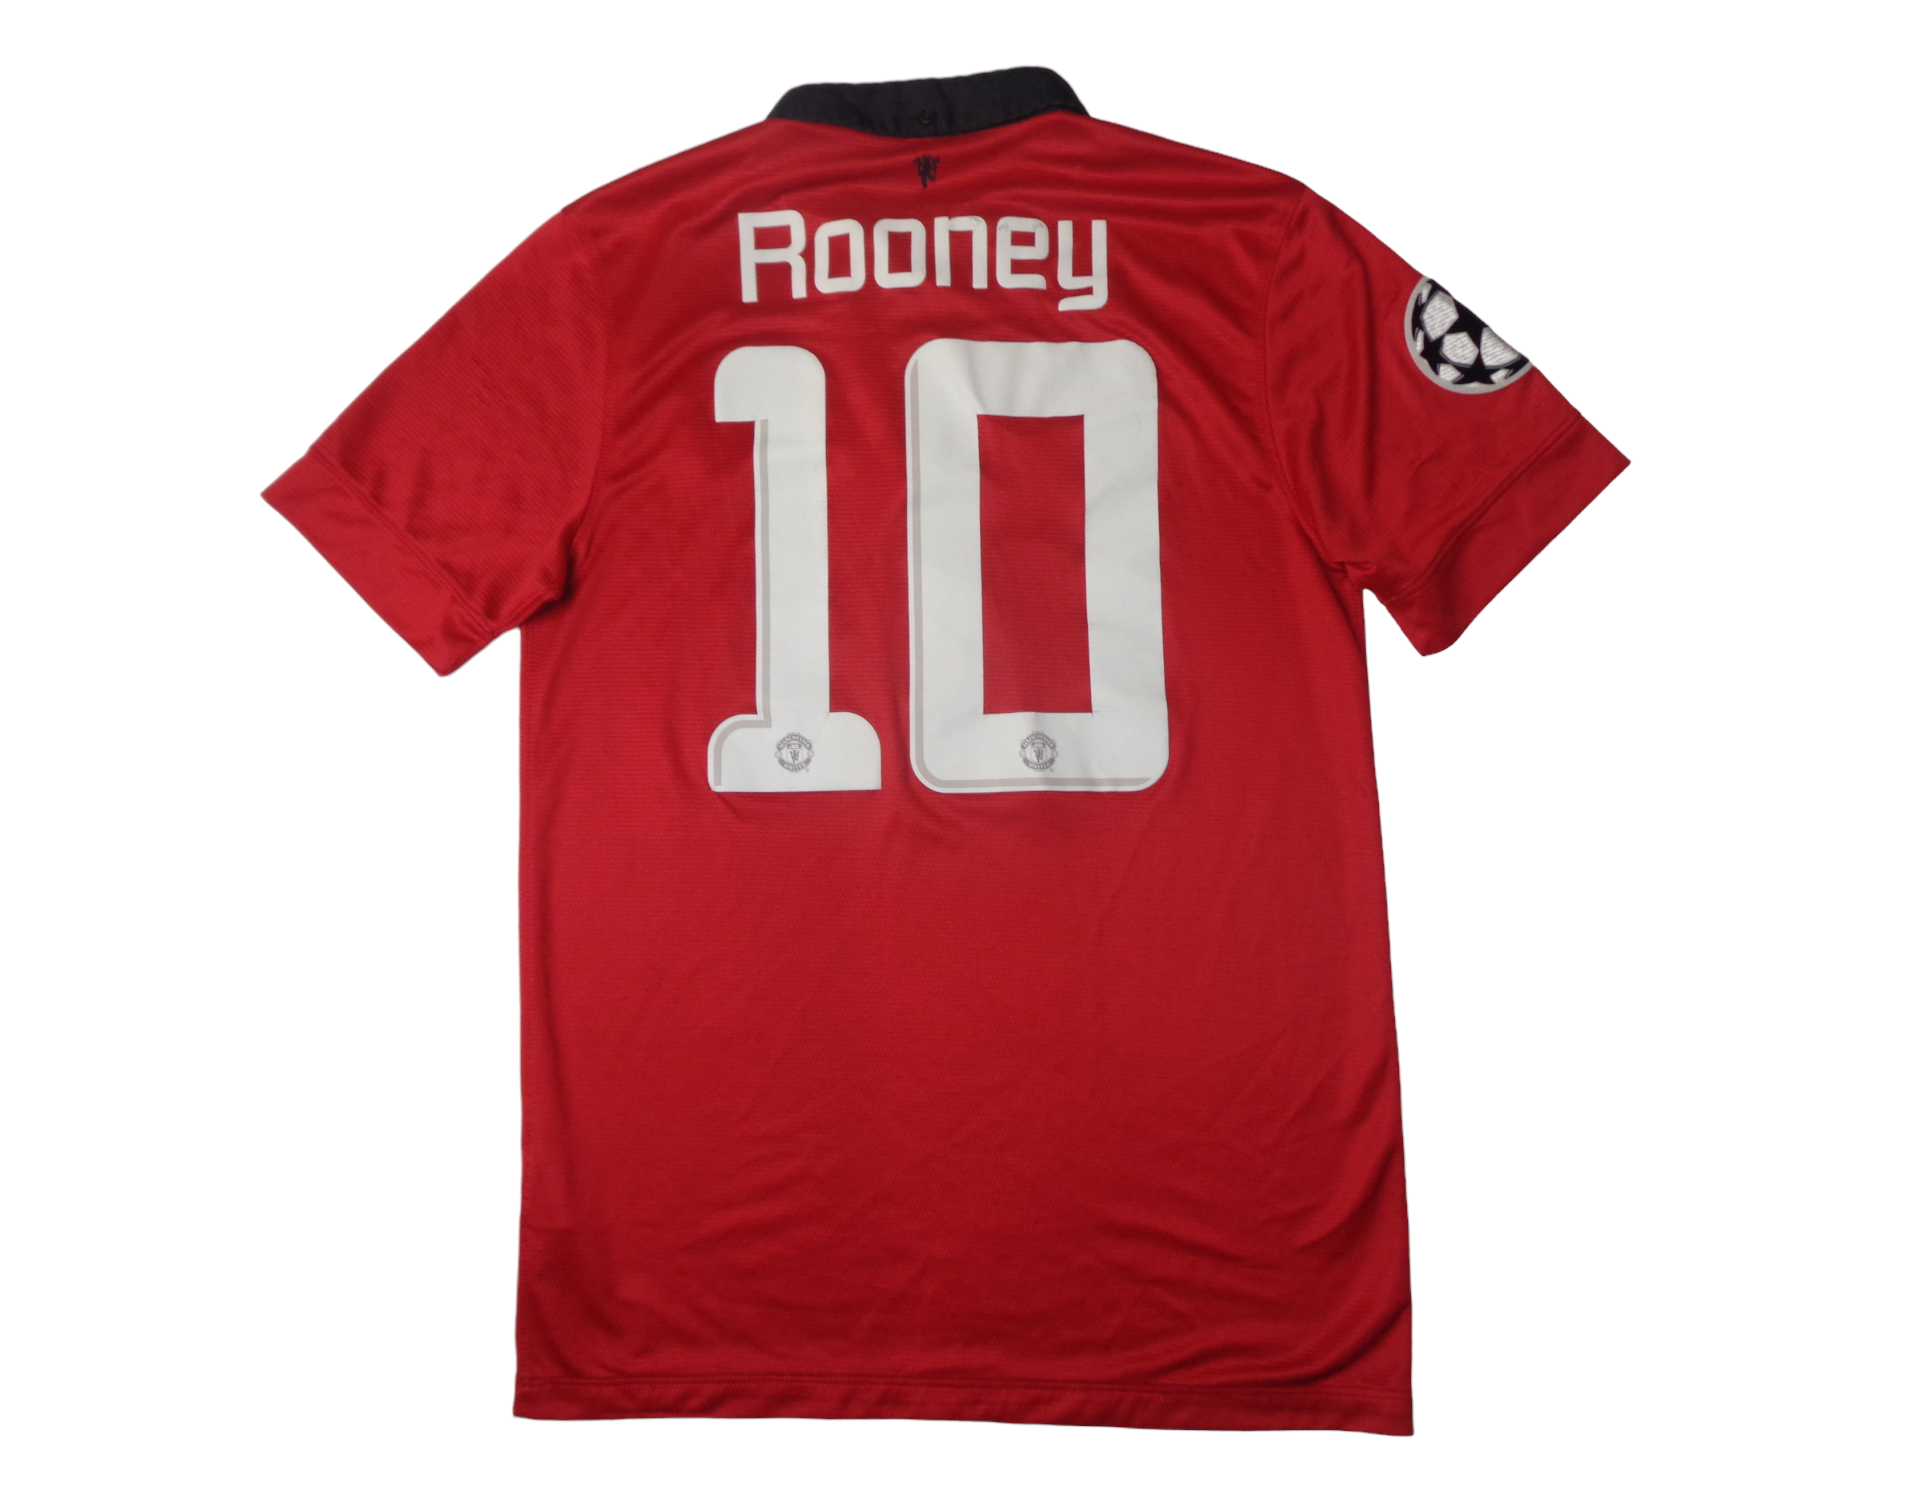 ROONEY #10 - MANCHESTER UNITED 2013/14 CHAMPIONS LEAGUE HOME SHIRT - NIKE - SIZE SMALL